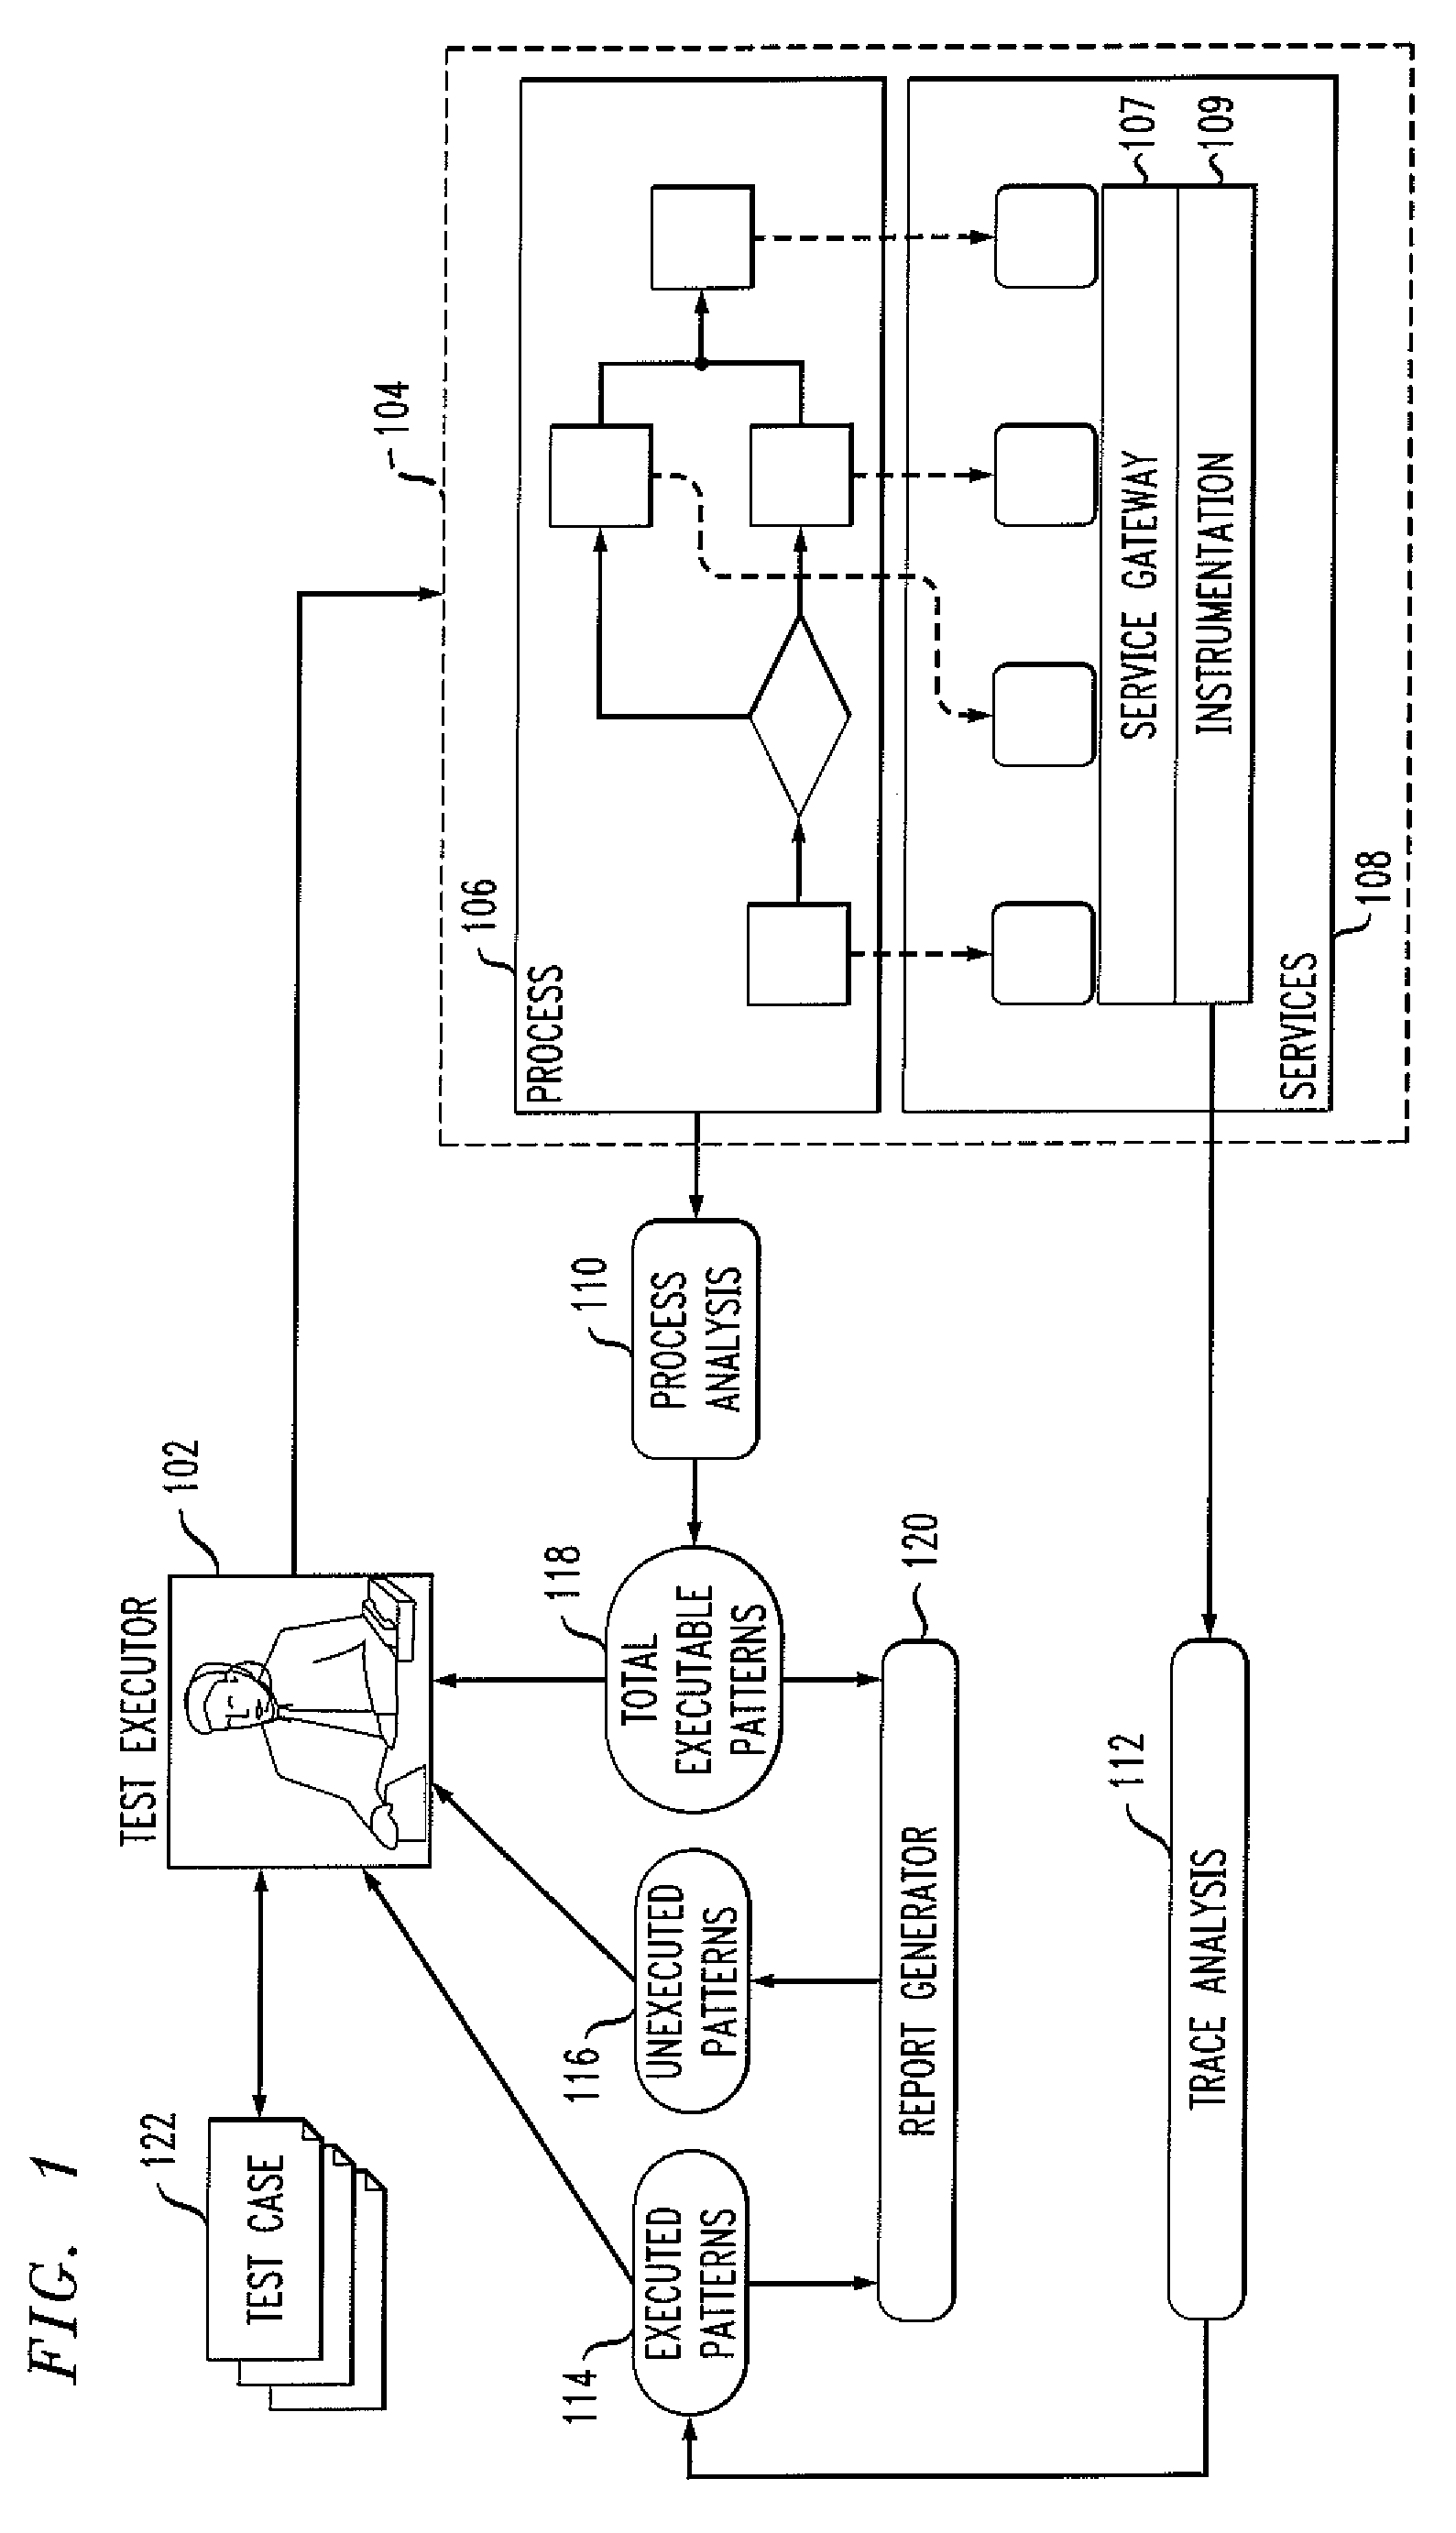 Method for Analyzing Transaction Traces to Enable Process Testing